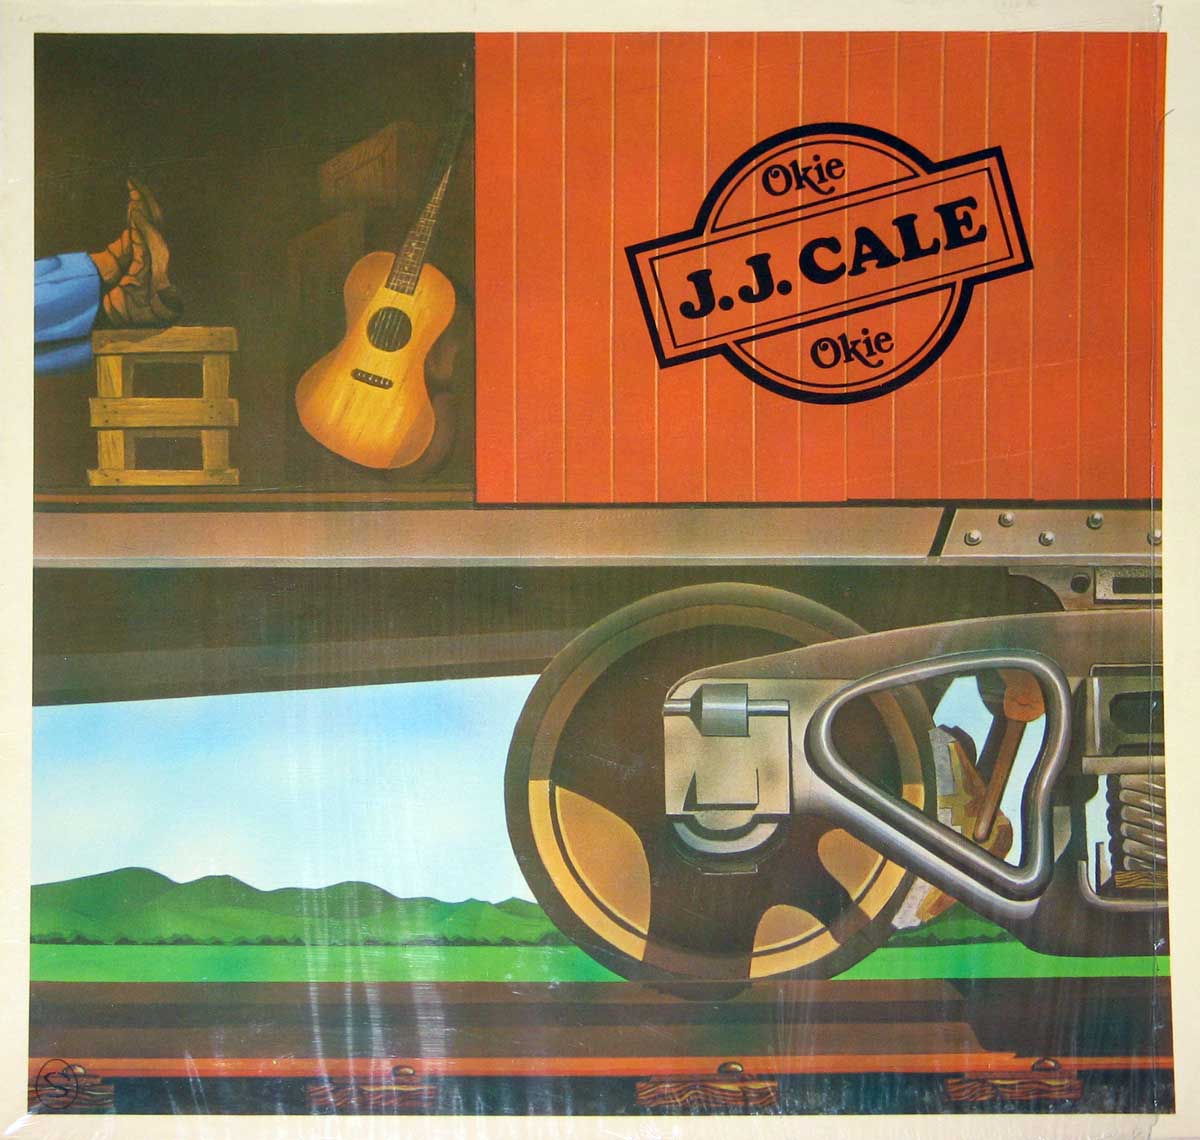 Album front cover photo if: J.J. Cale - Okie 